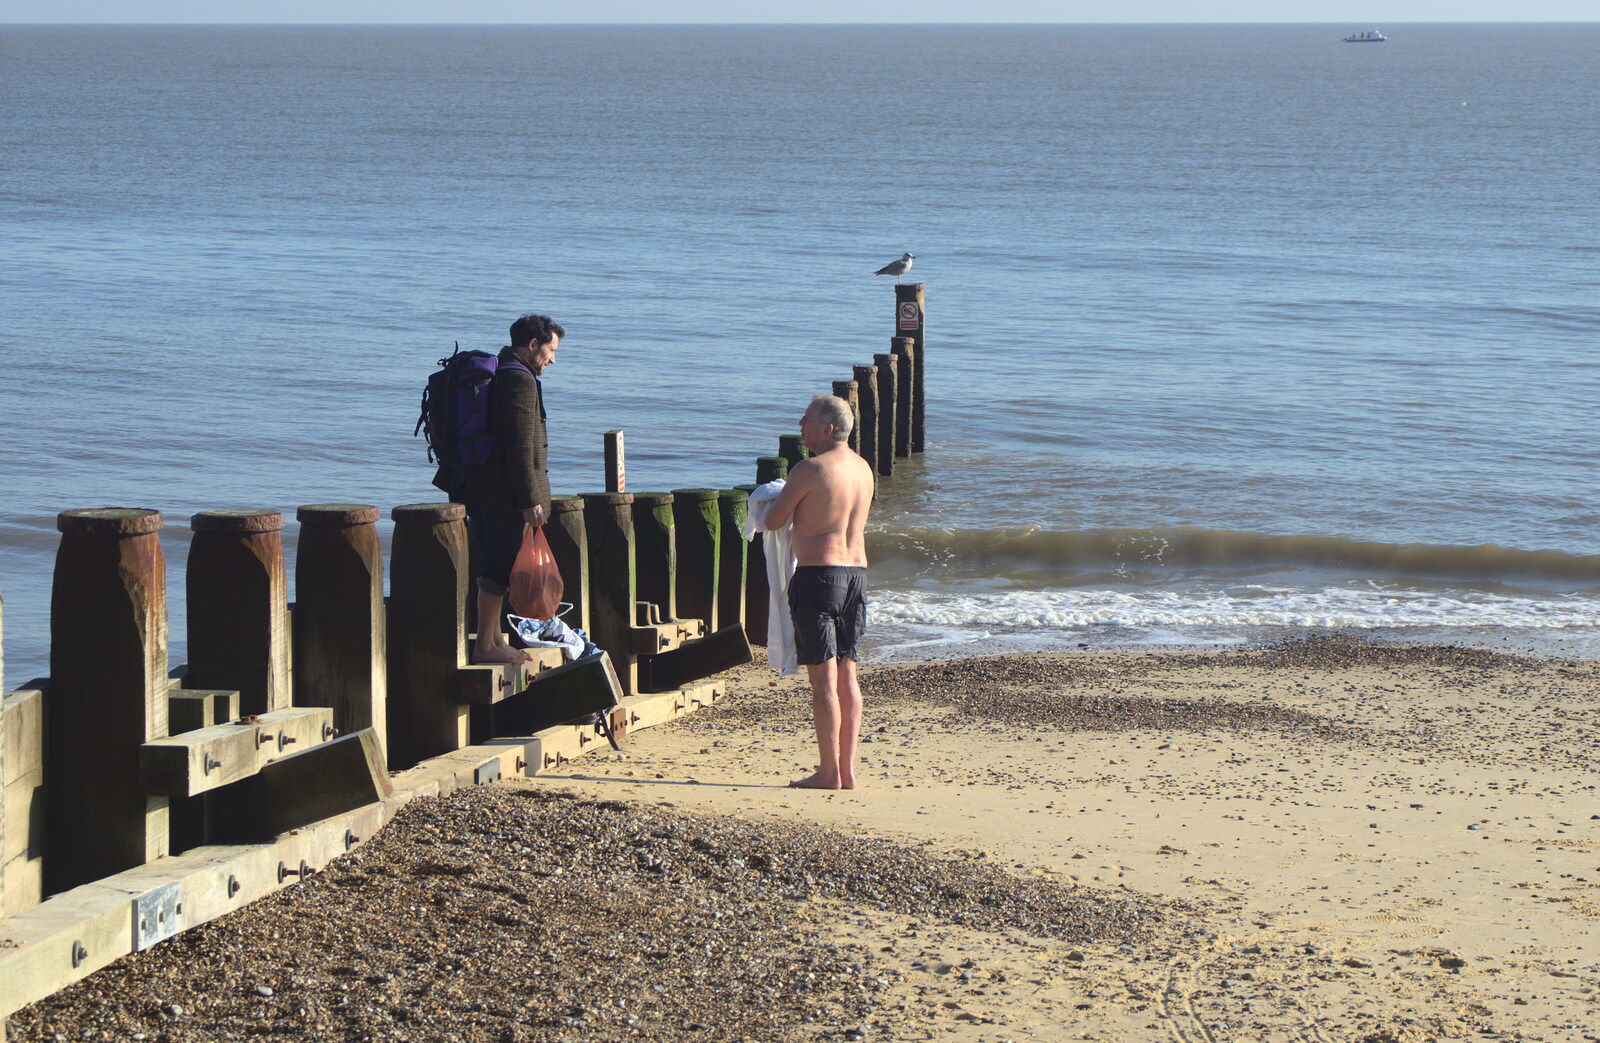 Someone actually swims in the sea from A Busy Day, Southwold and Thornham, Suffolk - 11th November 2012